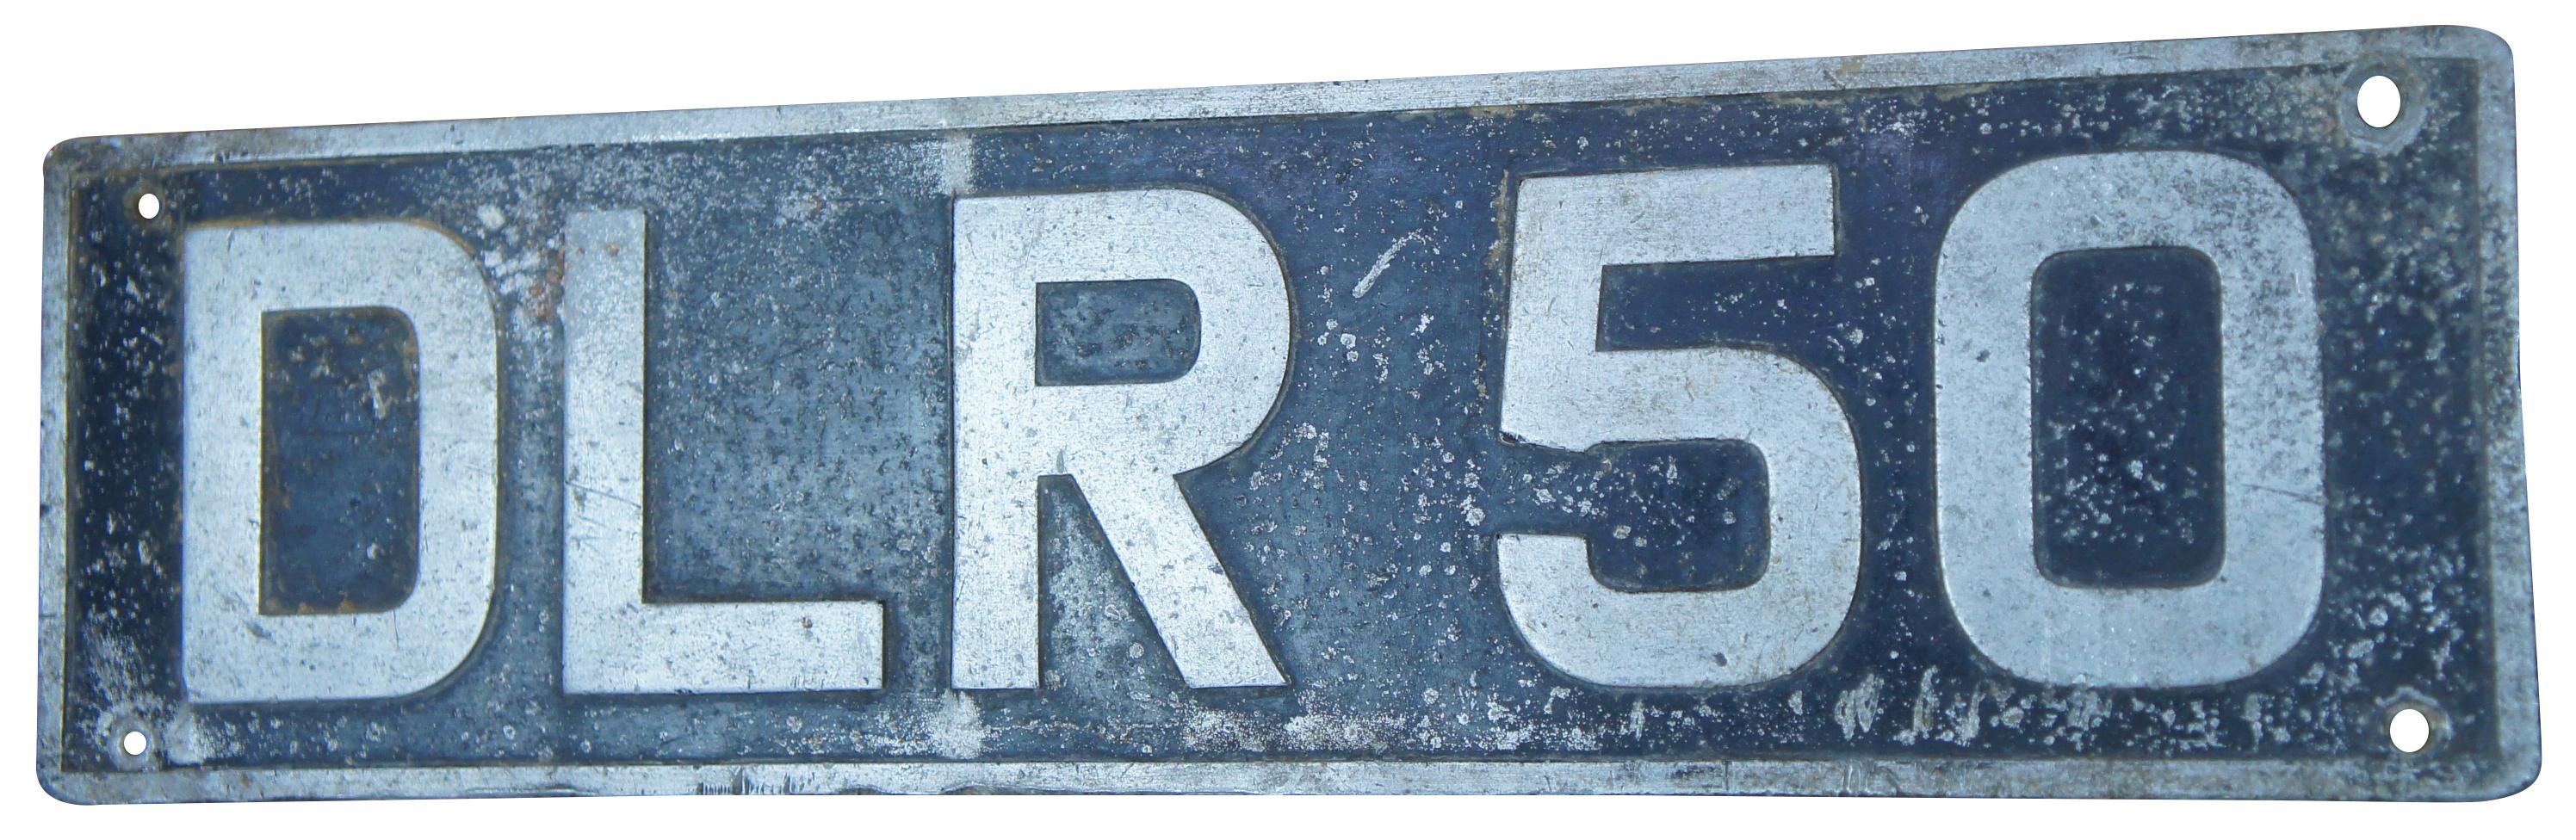 Rare antique European dealer license plate with the initials DLR and number 50.
 